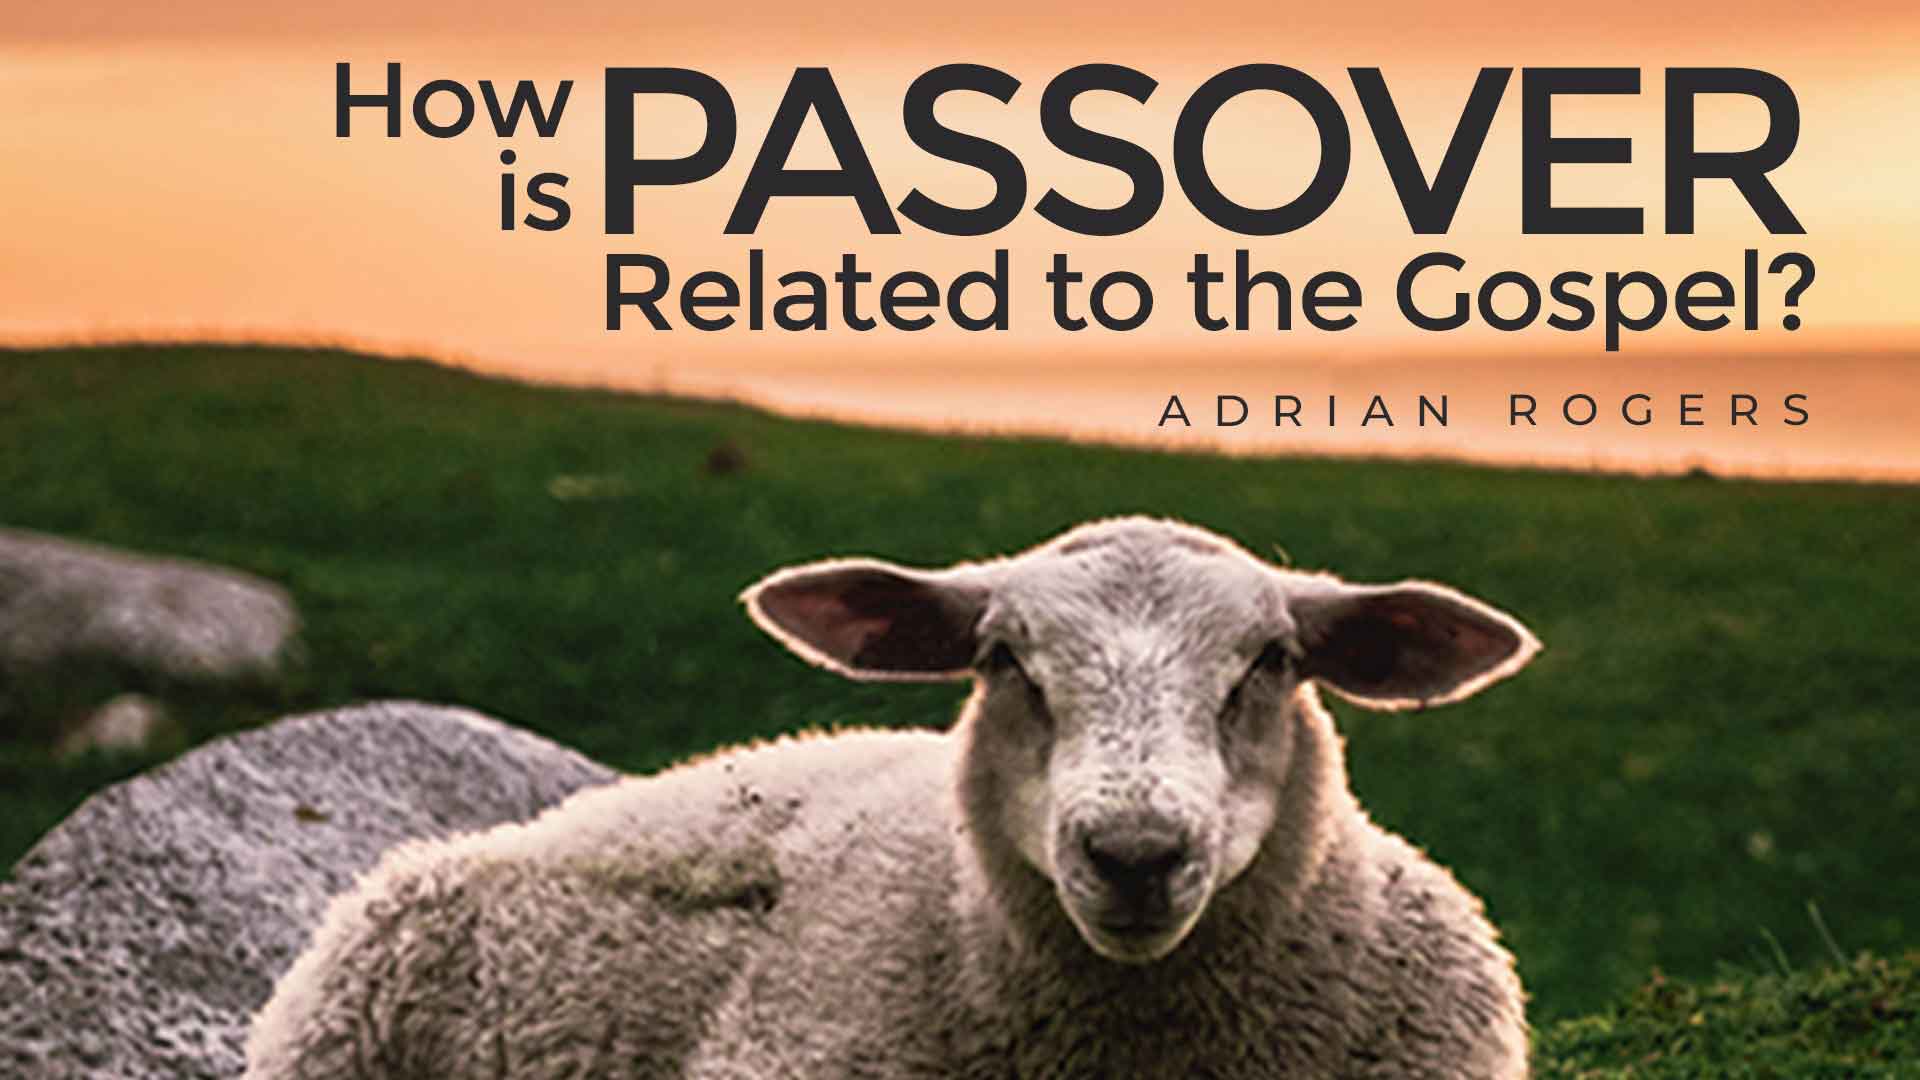 How is Passover Related to the Gospel 1920x1080